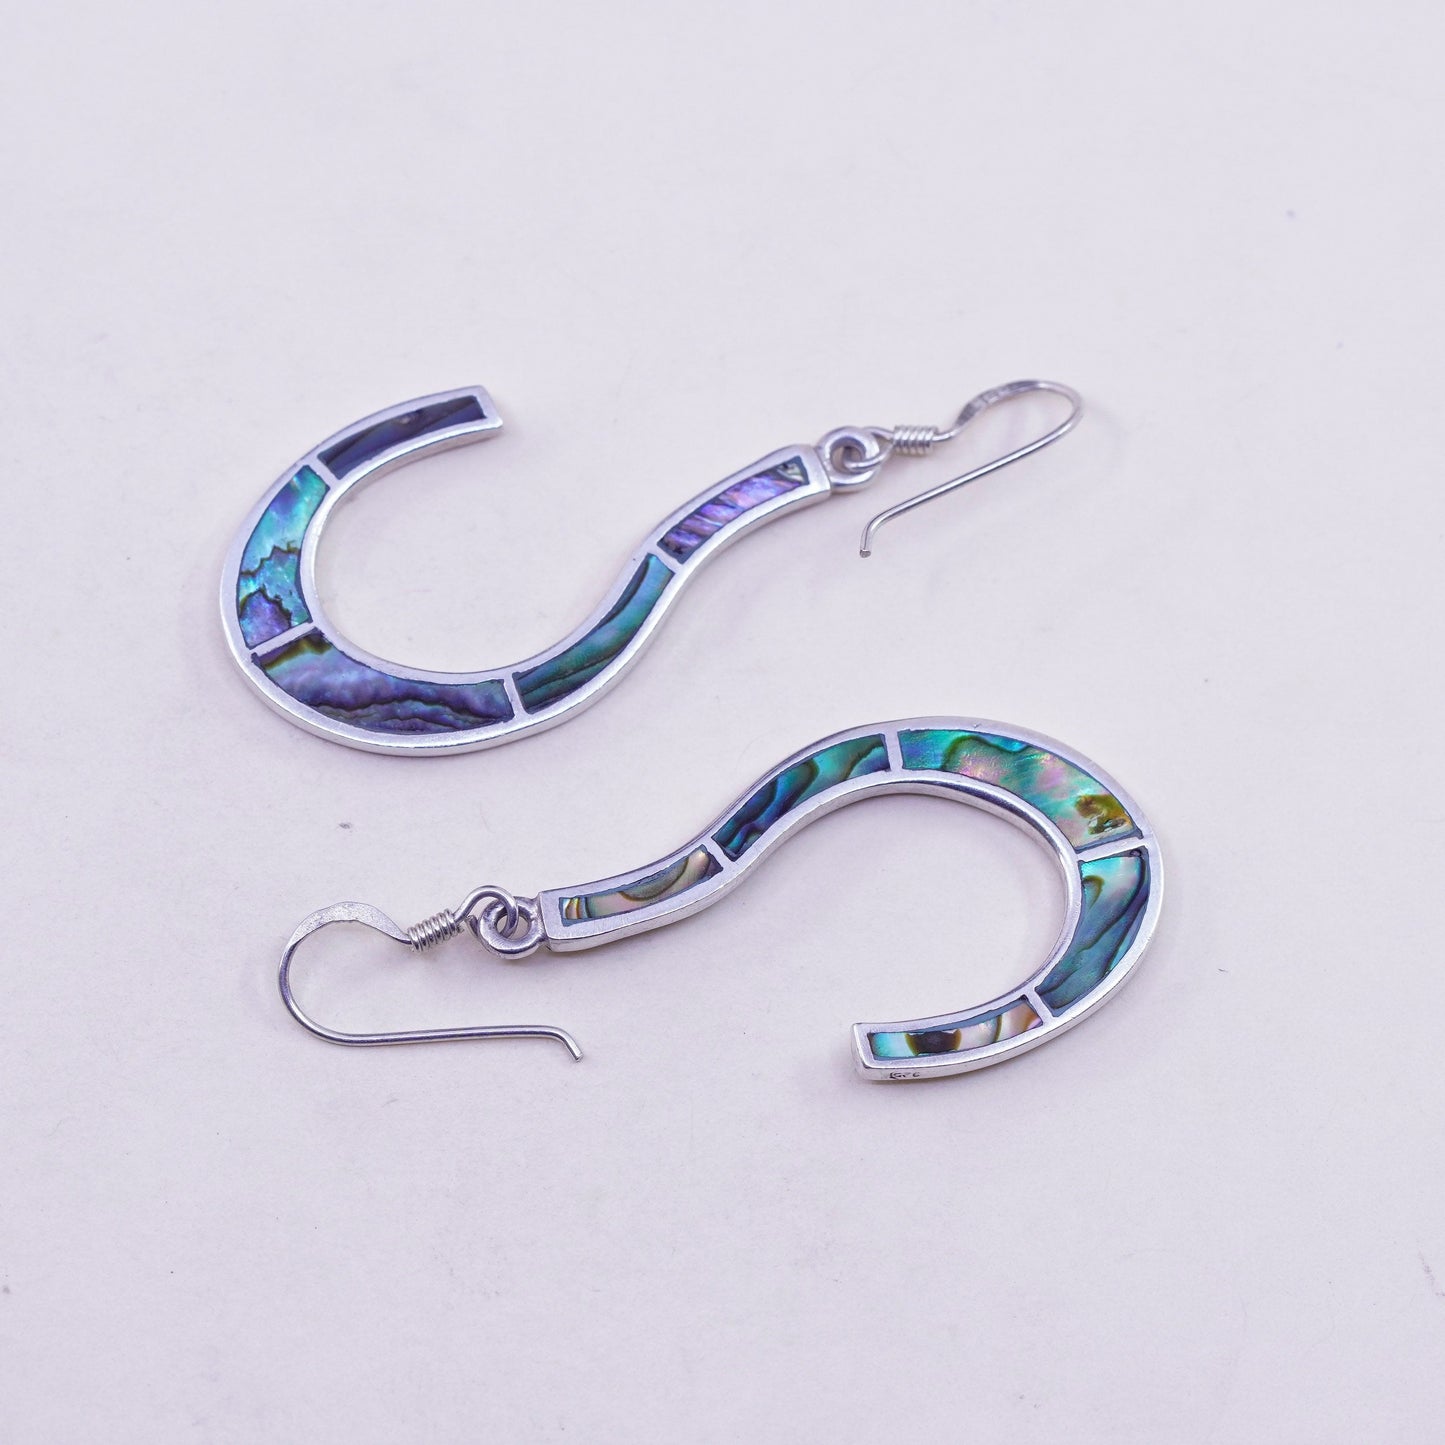 Vintage Sterling 925 silver handmade earrings, dangles with abalone inlay